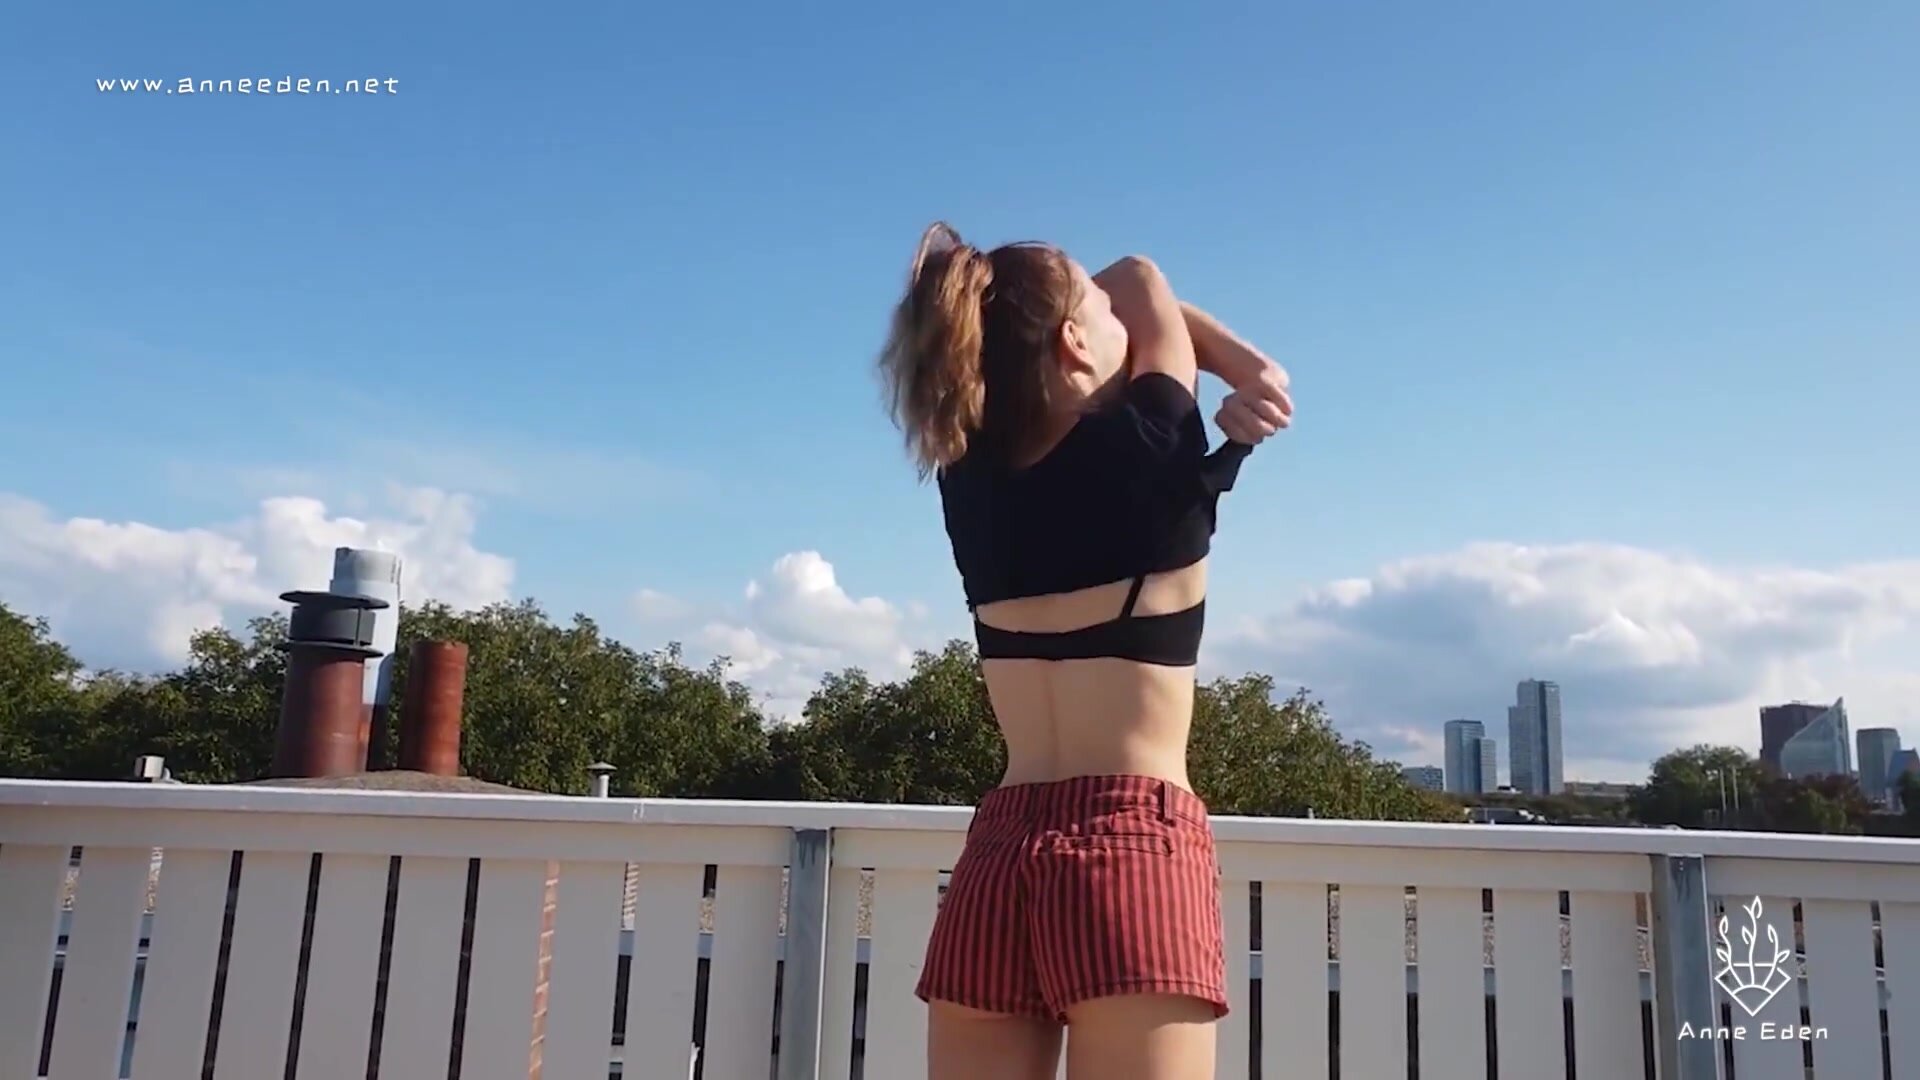 Anne Eden - Shy Girl fuck on Rooftop and getting caught